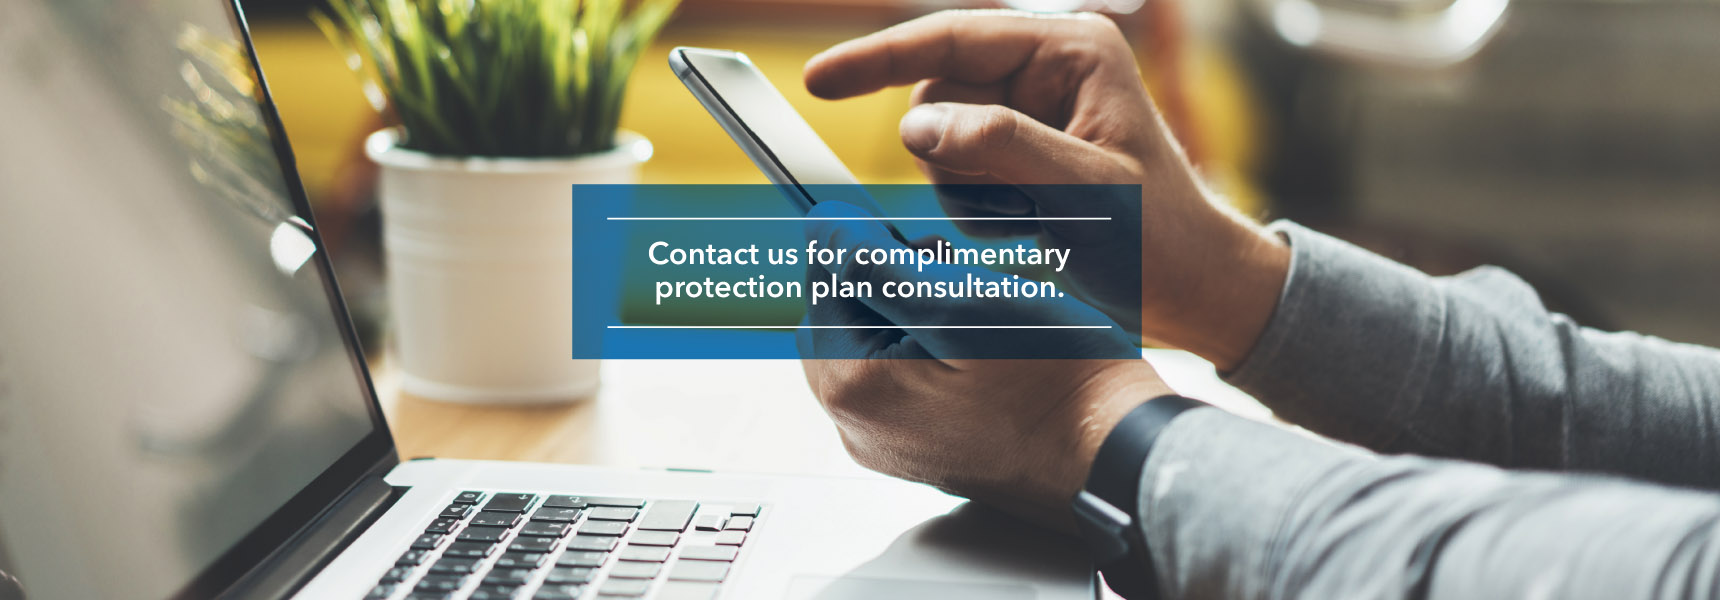 Contact us for complimentary protection plan consultation.